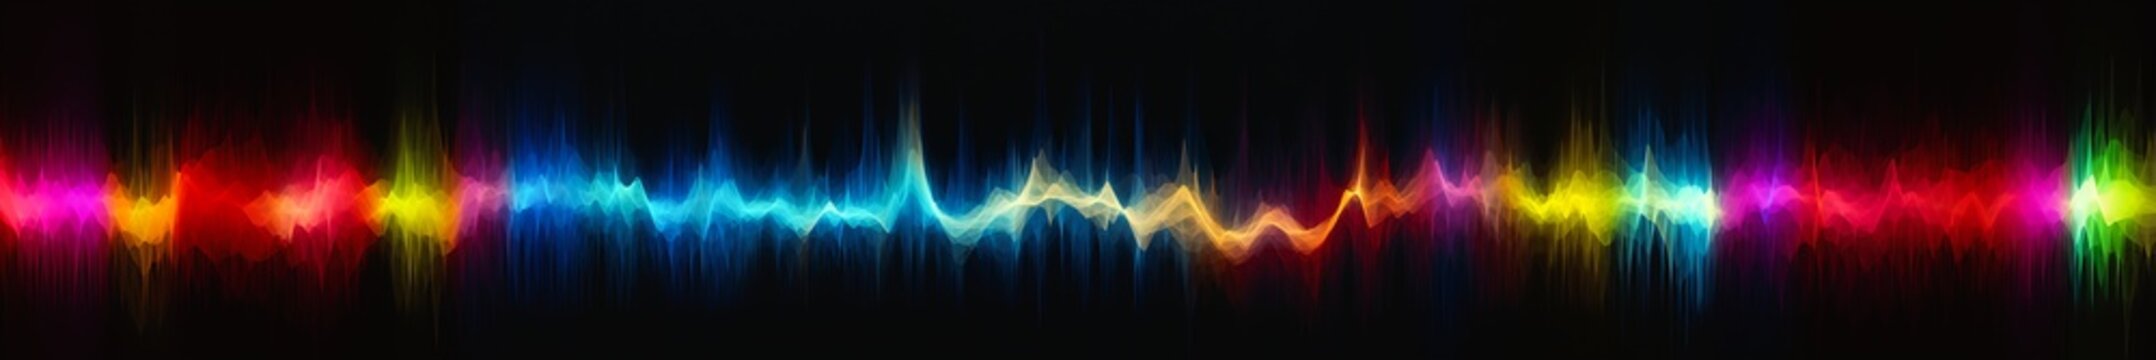 closeup sound wave spectral portrait plain studio background filters sparse floating particles thin strokes lossless quality ears listening solid colored shapes